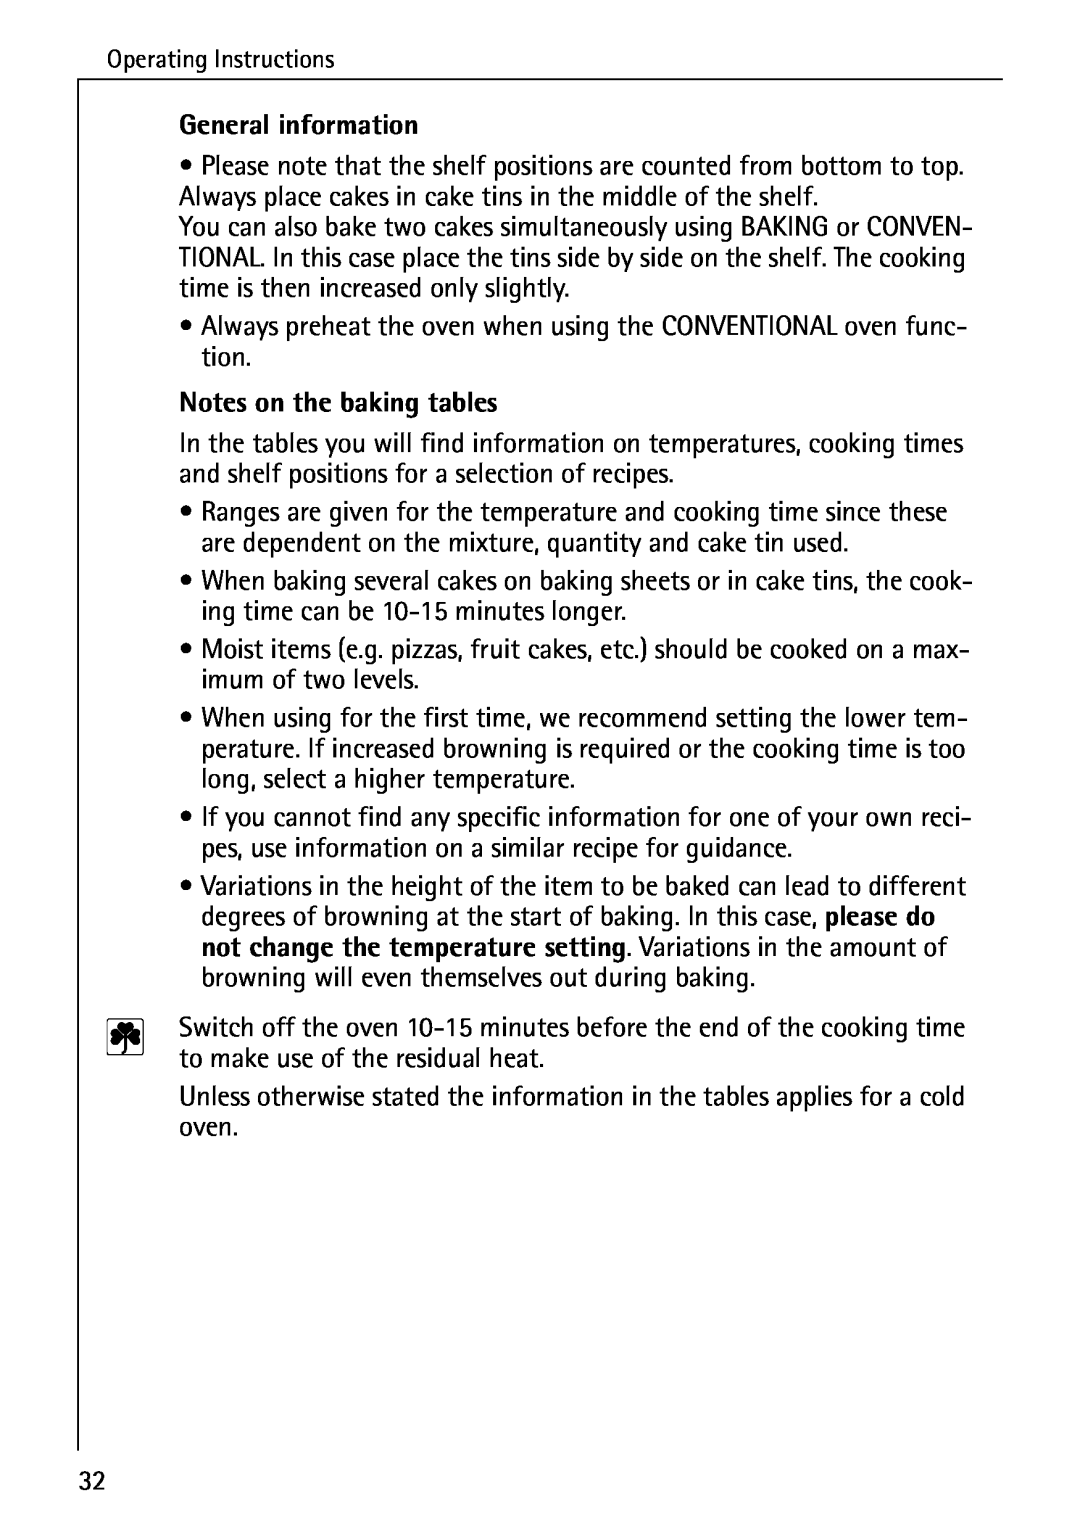 Electrolux B6140-1 manual General information, Notes on the baking tables 